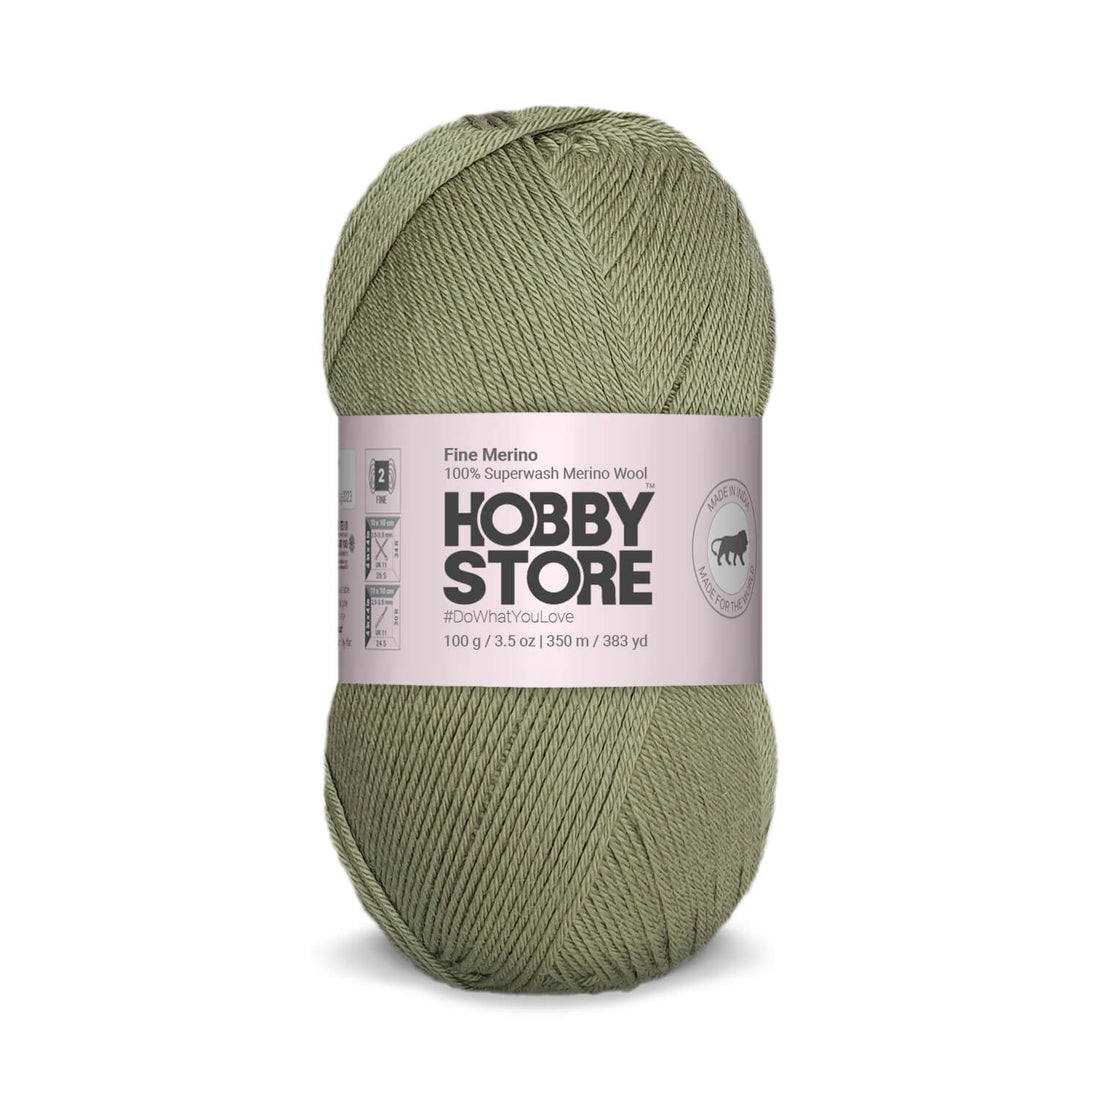 Fine Merino Wool by Hobby Store - Lincoln FM019